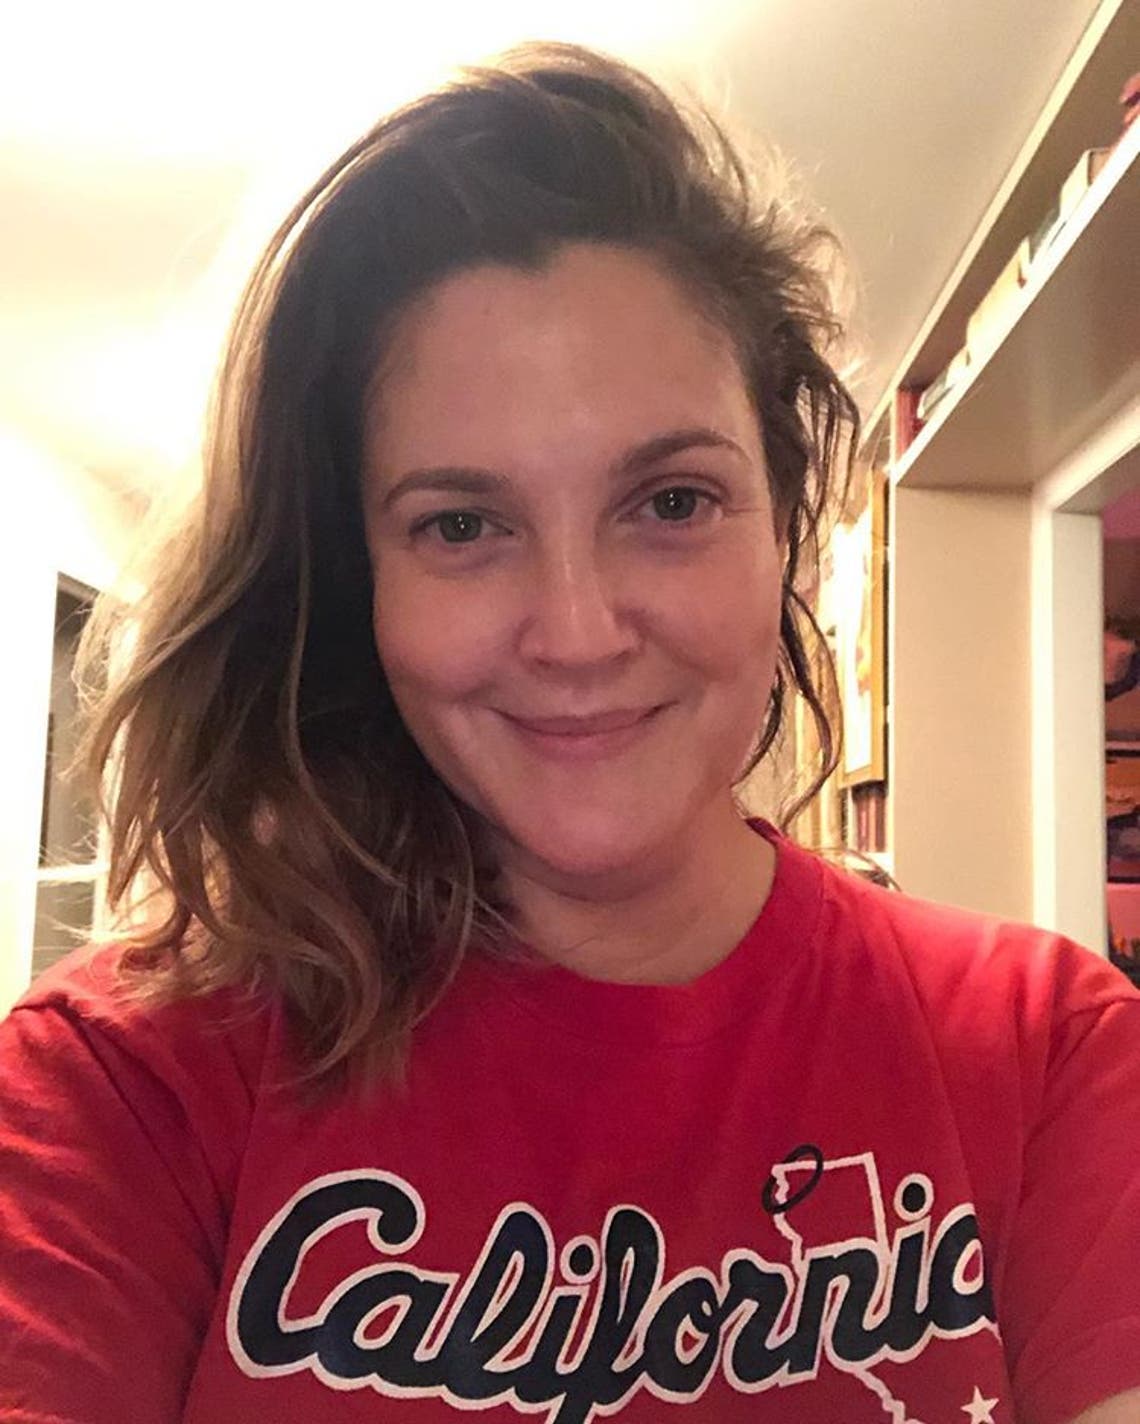 Drew Barrymore Celebrates 47th Birthday with Fresh-Face Selfie